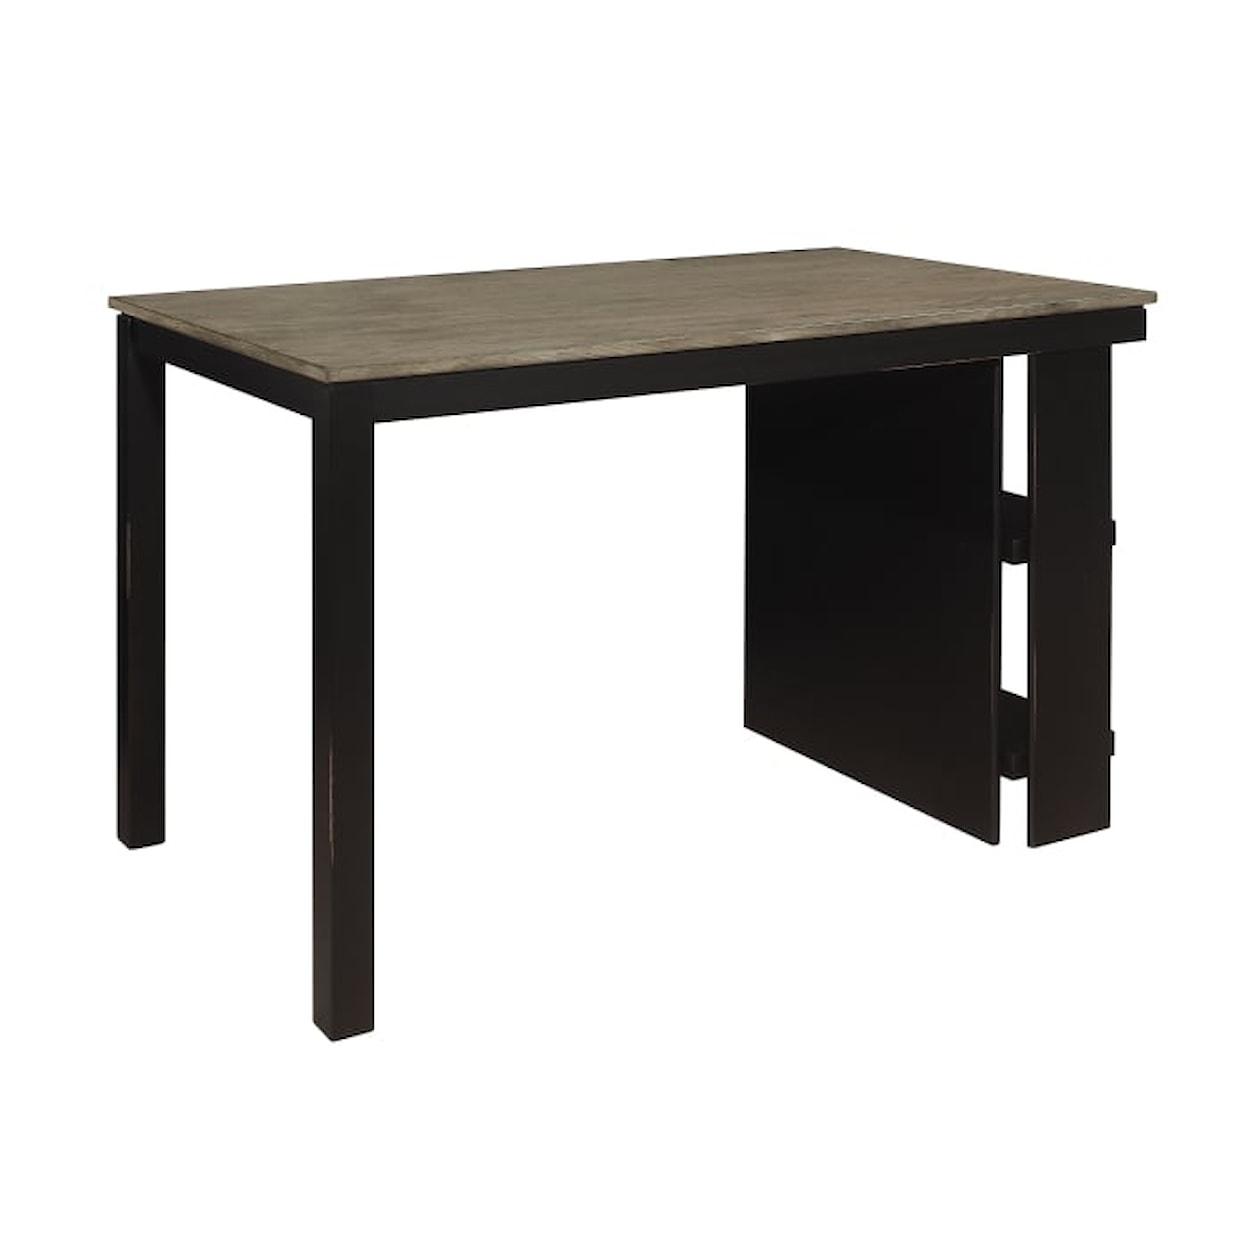 Homelegance Furniture Stratus Counter Height Table